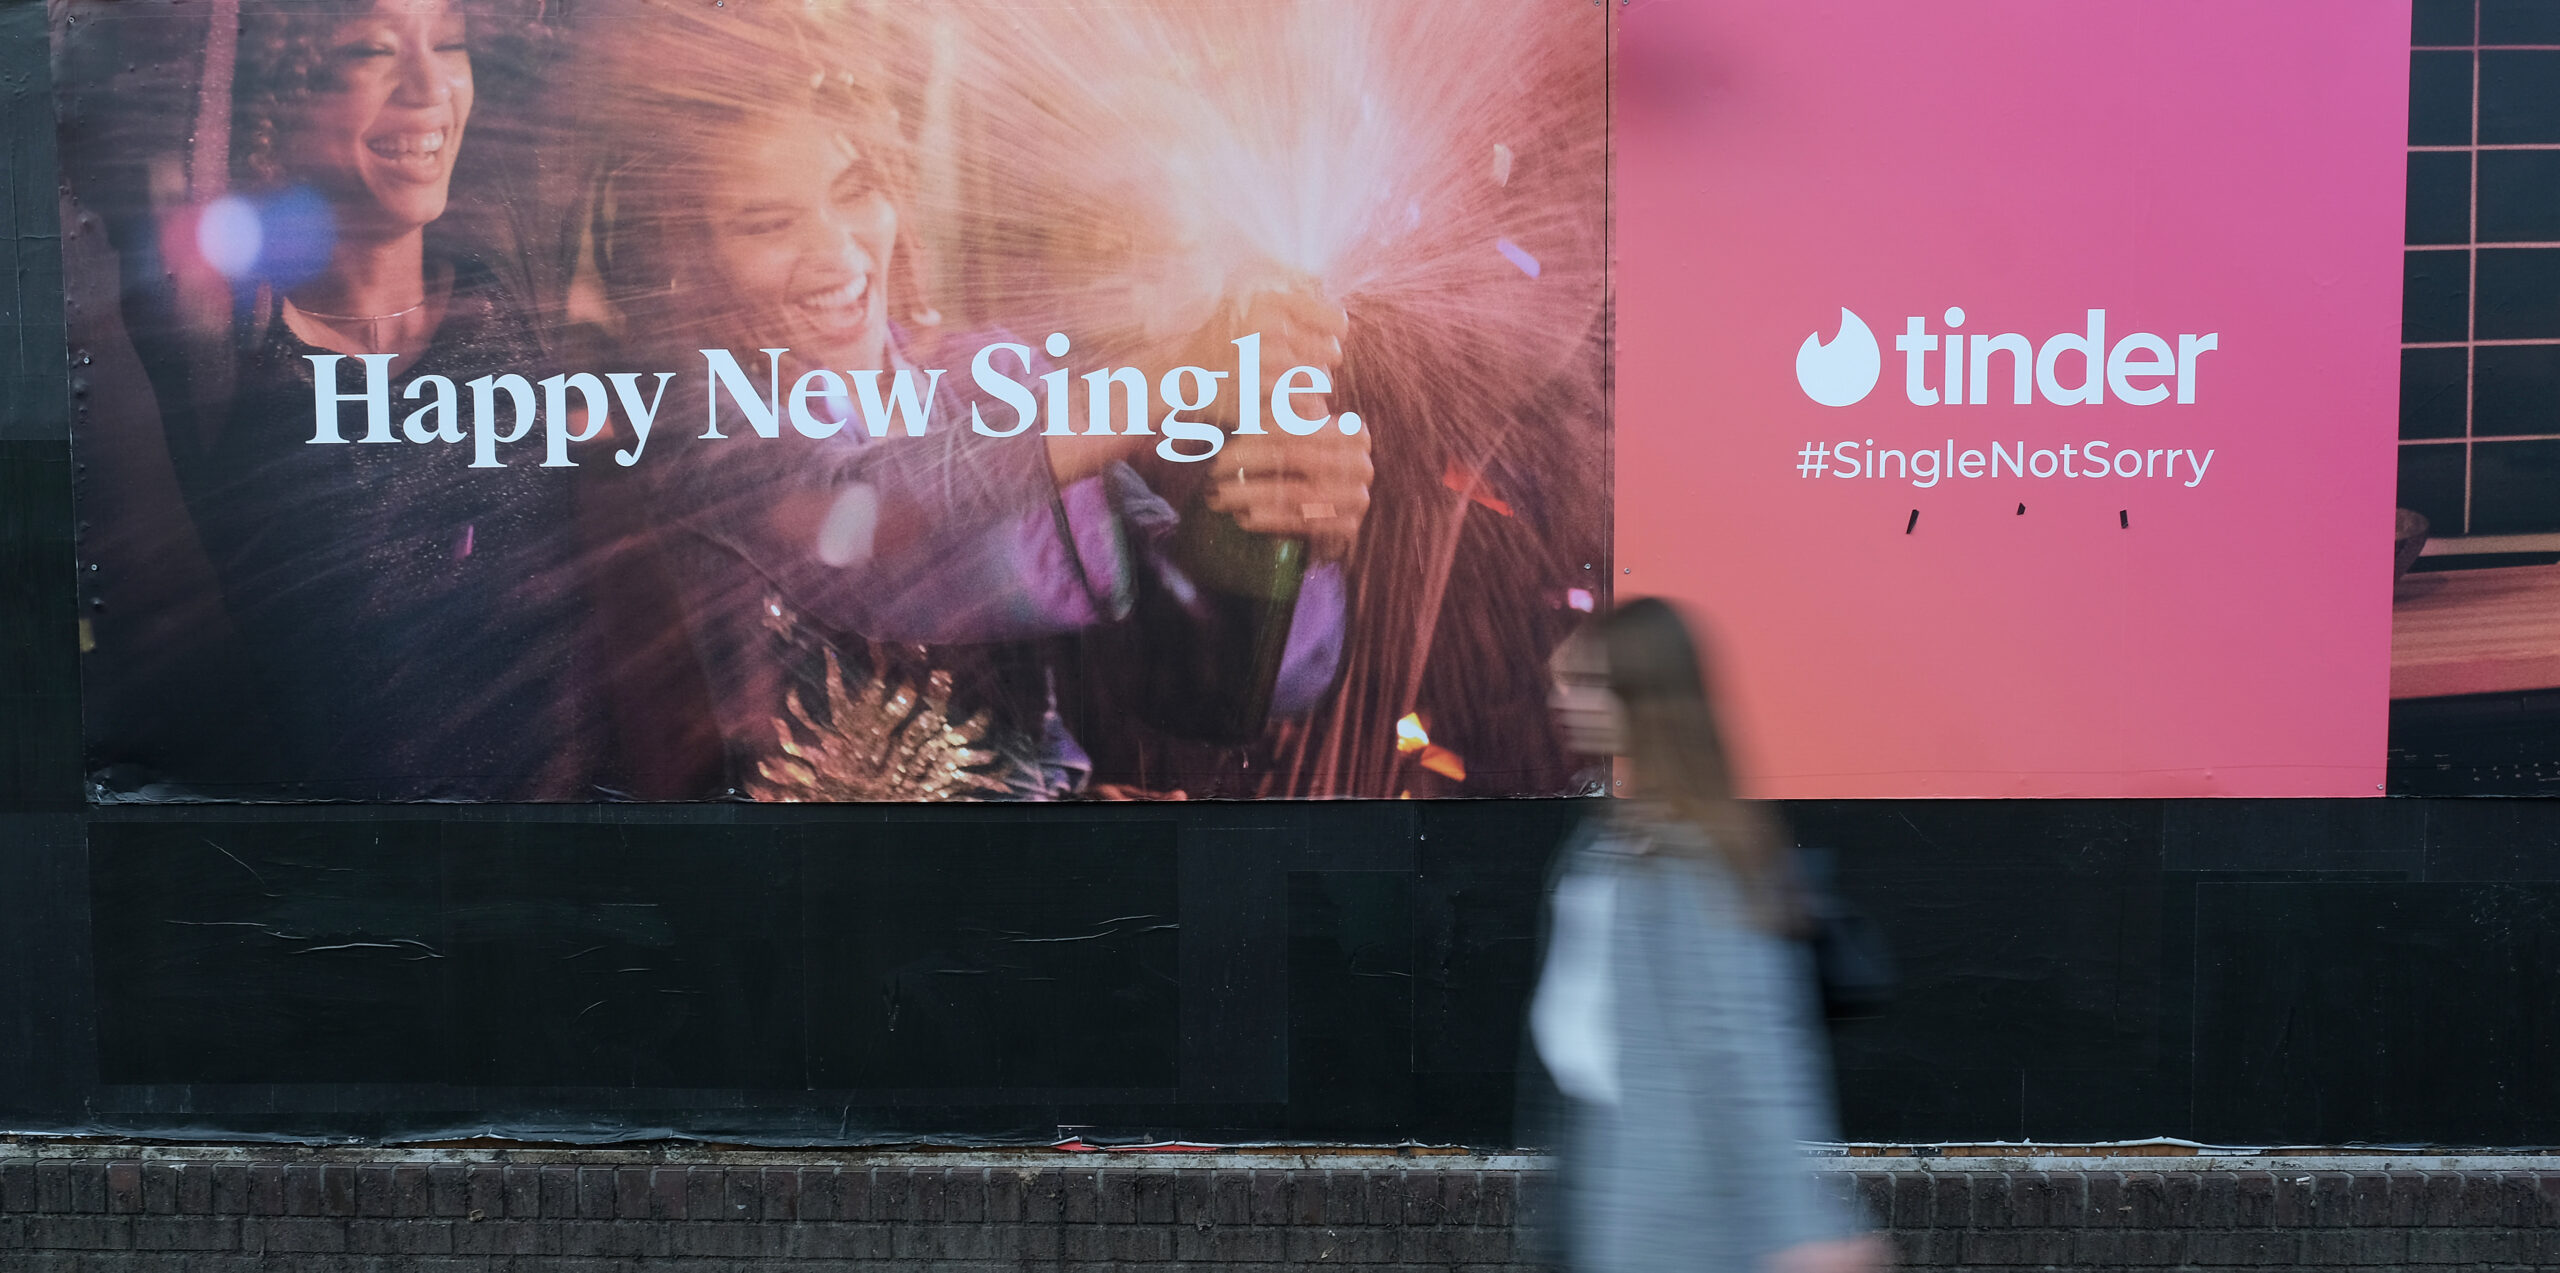 Tinder, Hinge and other dating apps face legal reckoning